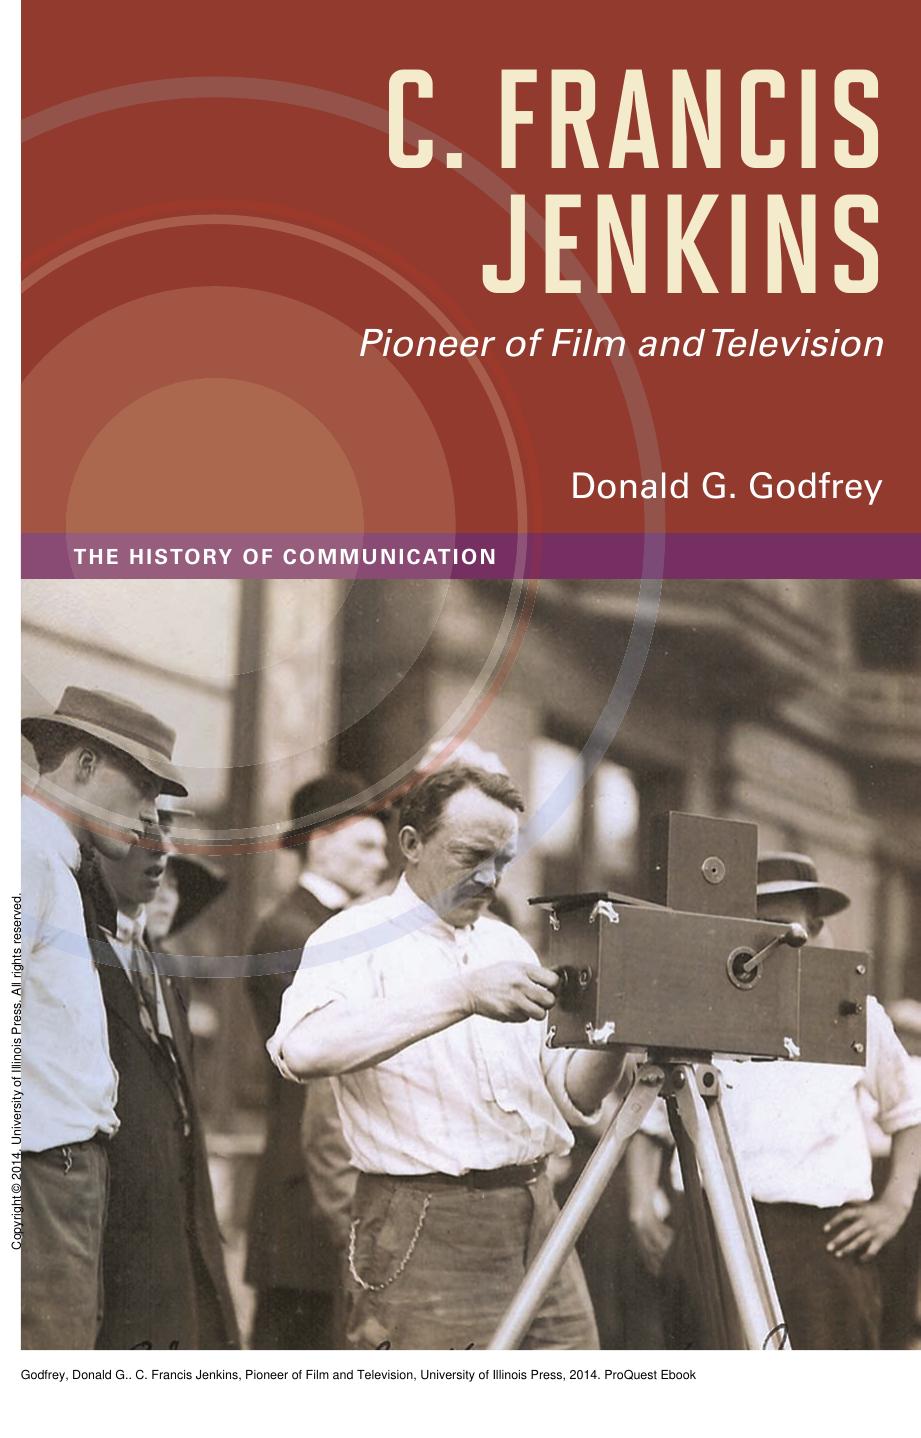 C. Francis Jenkins, Pioneer of Film and Television by Donald G. Godfrey